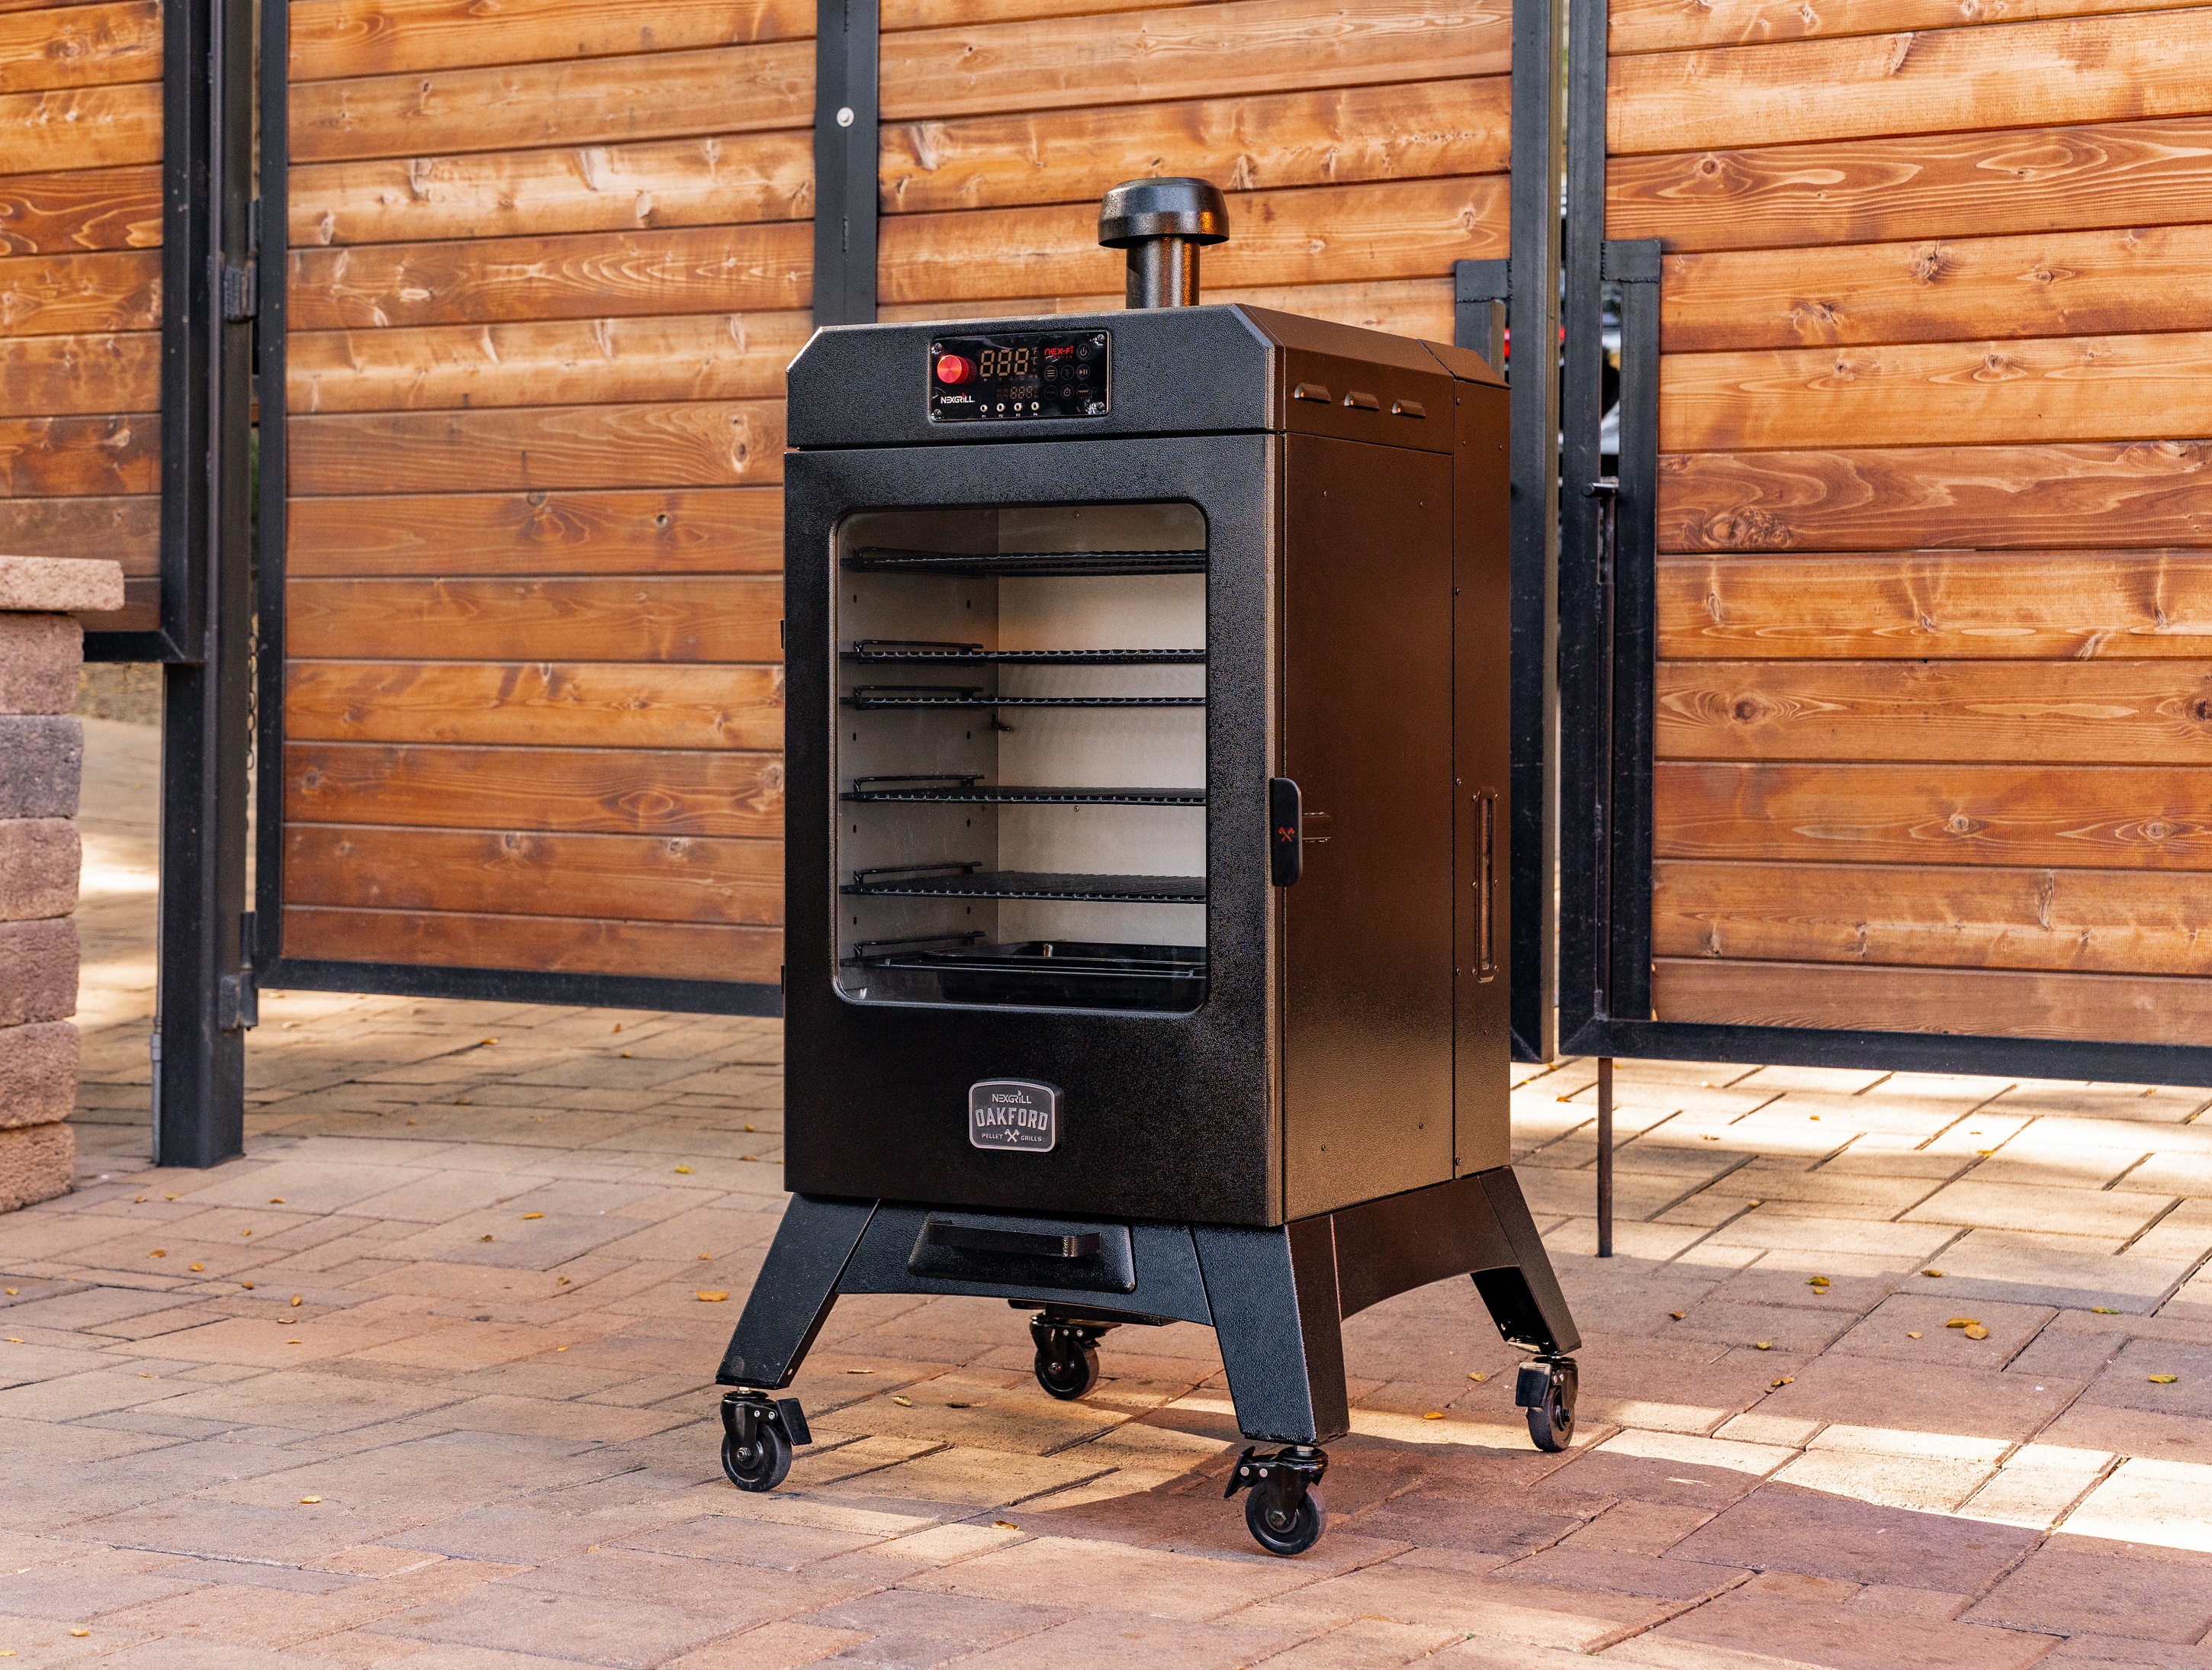 The durable Vertical Pellet Smoker is built with hammer tone steel that’s been finished with a high-gloss black powder coating and a glass window on the smoker box.